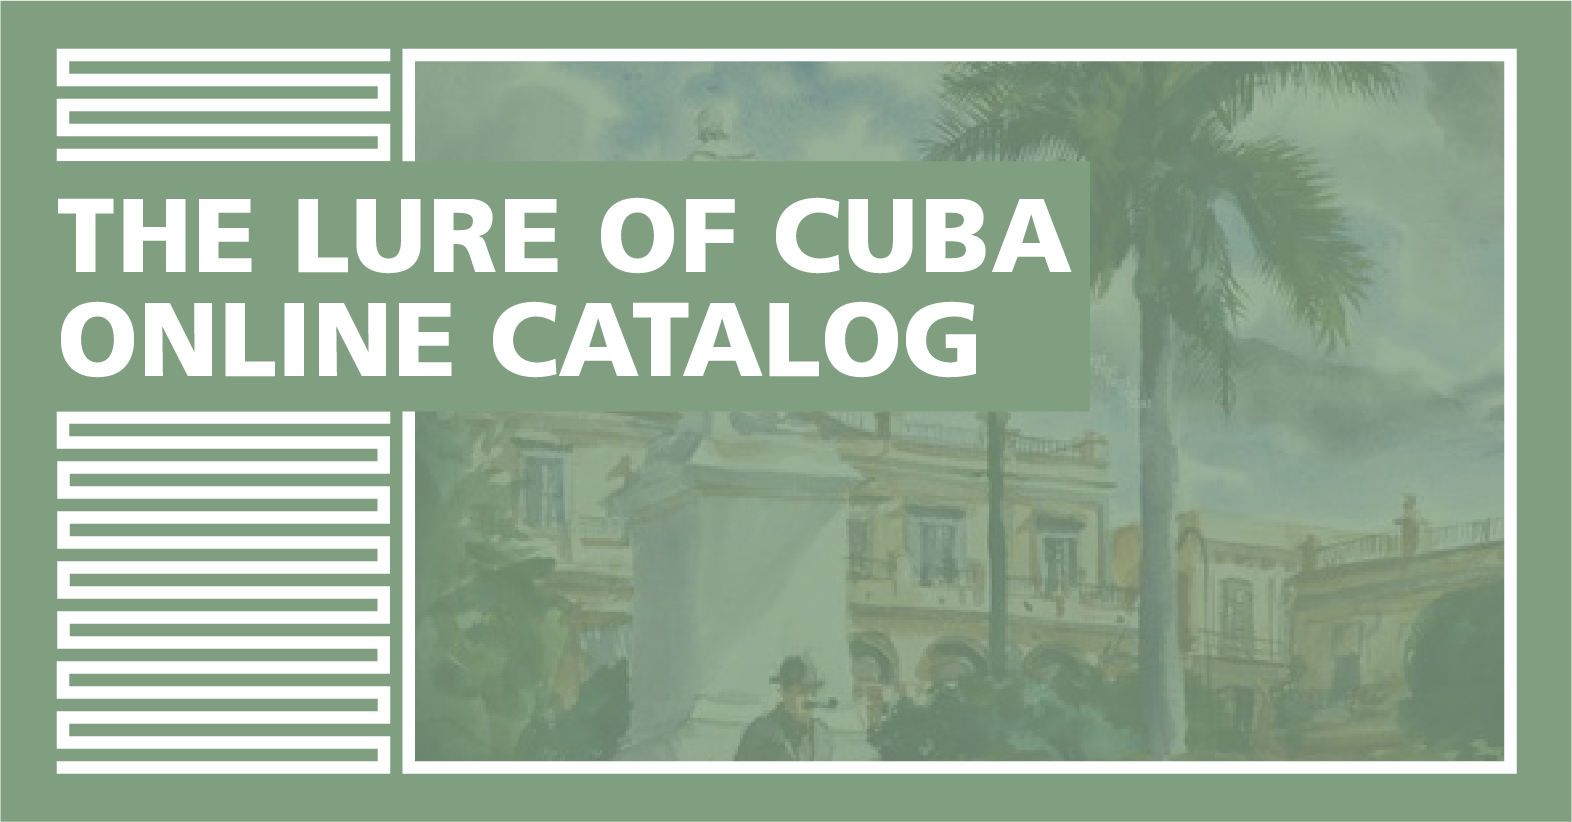 Cover Image for "The Lure of Cuba Online Catalog"